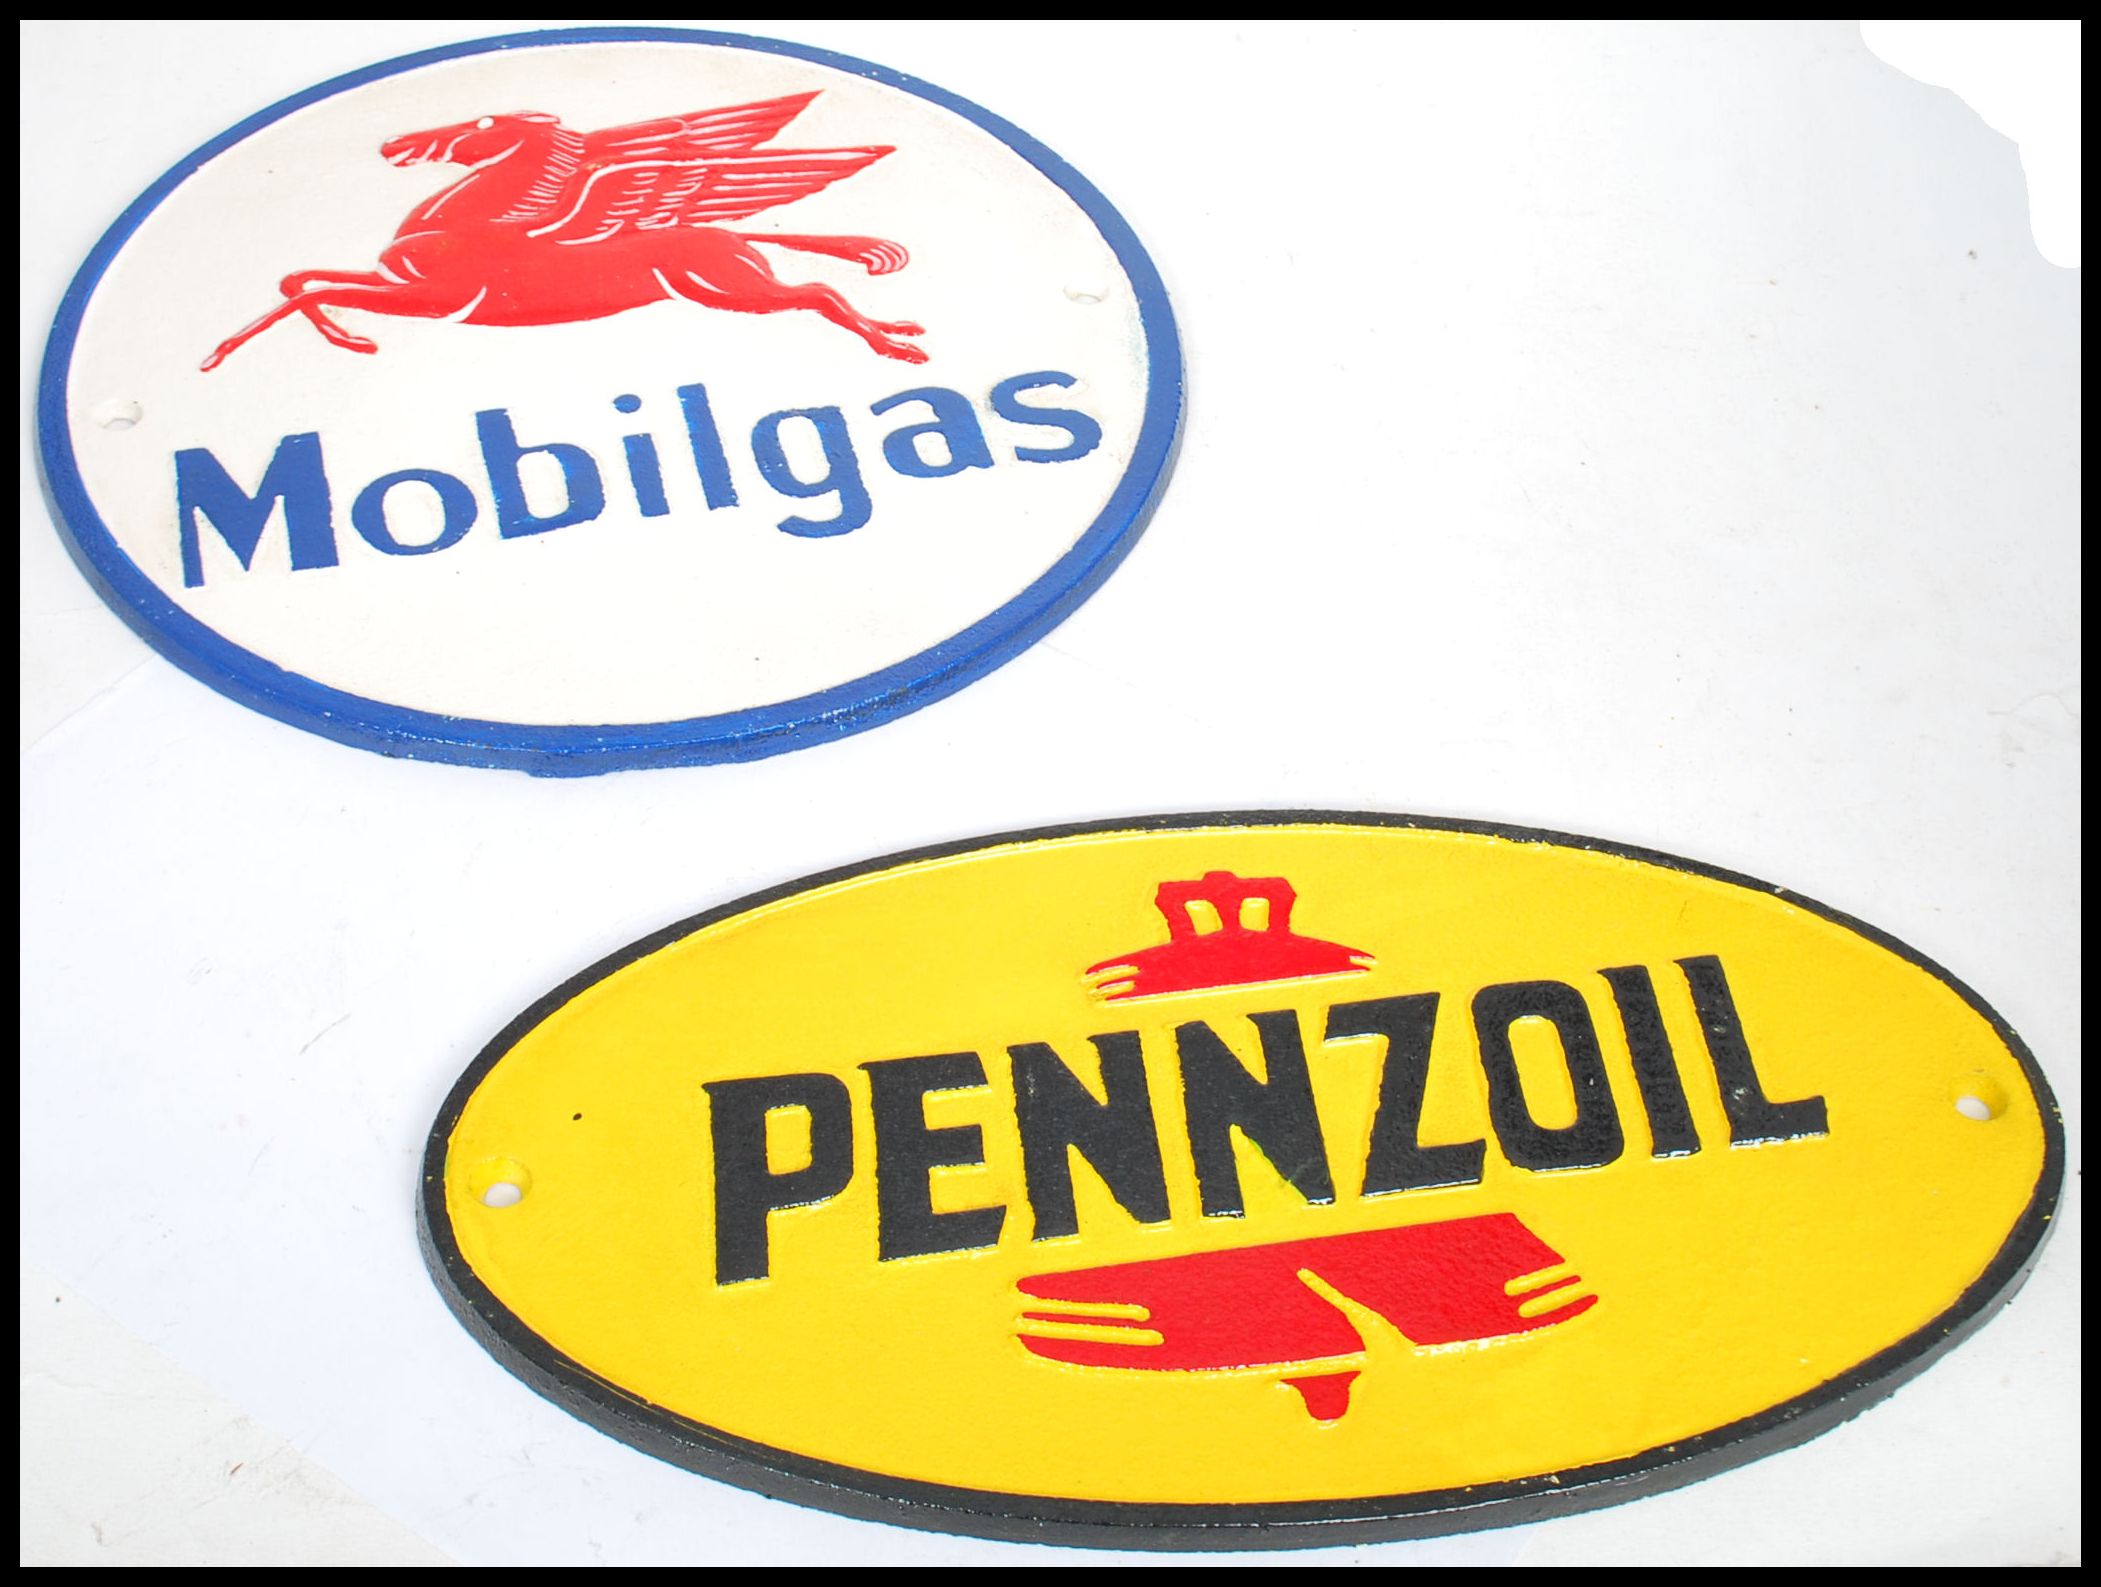 A pair of vintage style cast metal point of sale advertising garage wall plaques for Mobilgas and